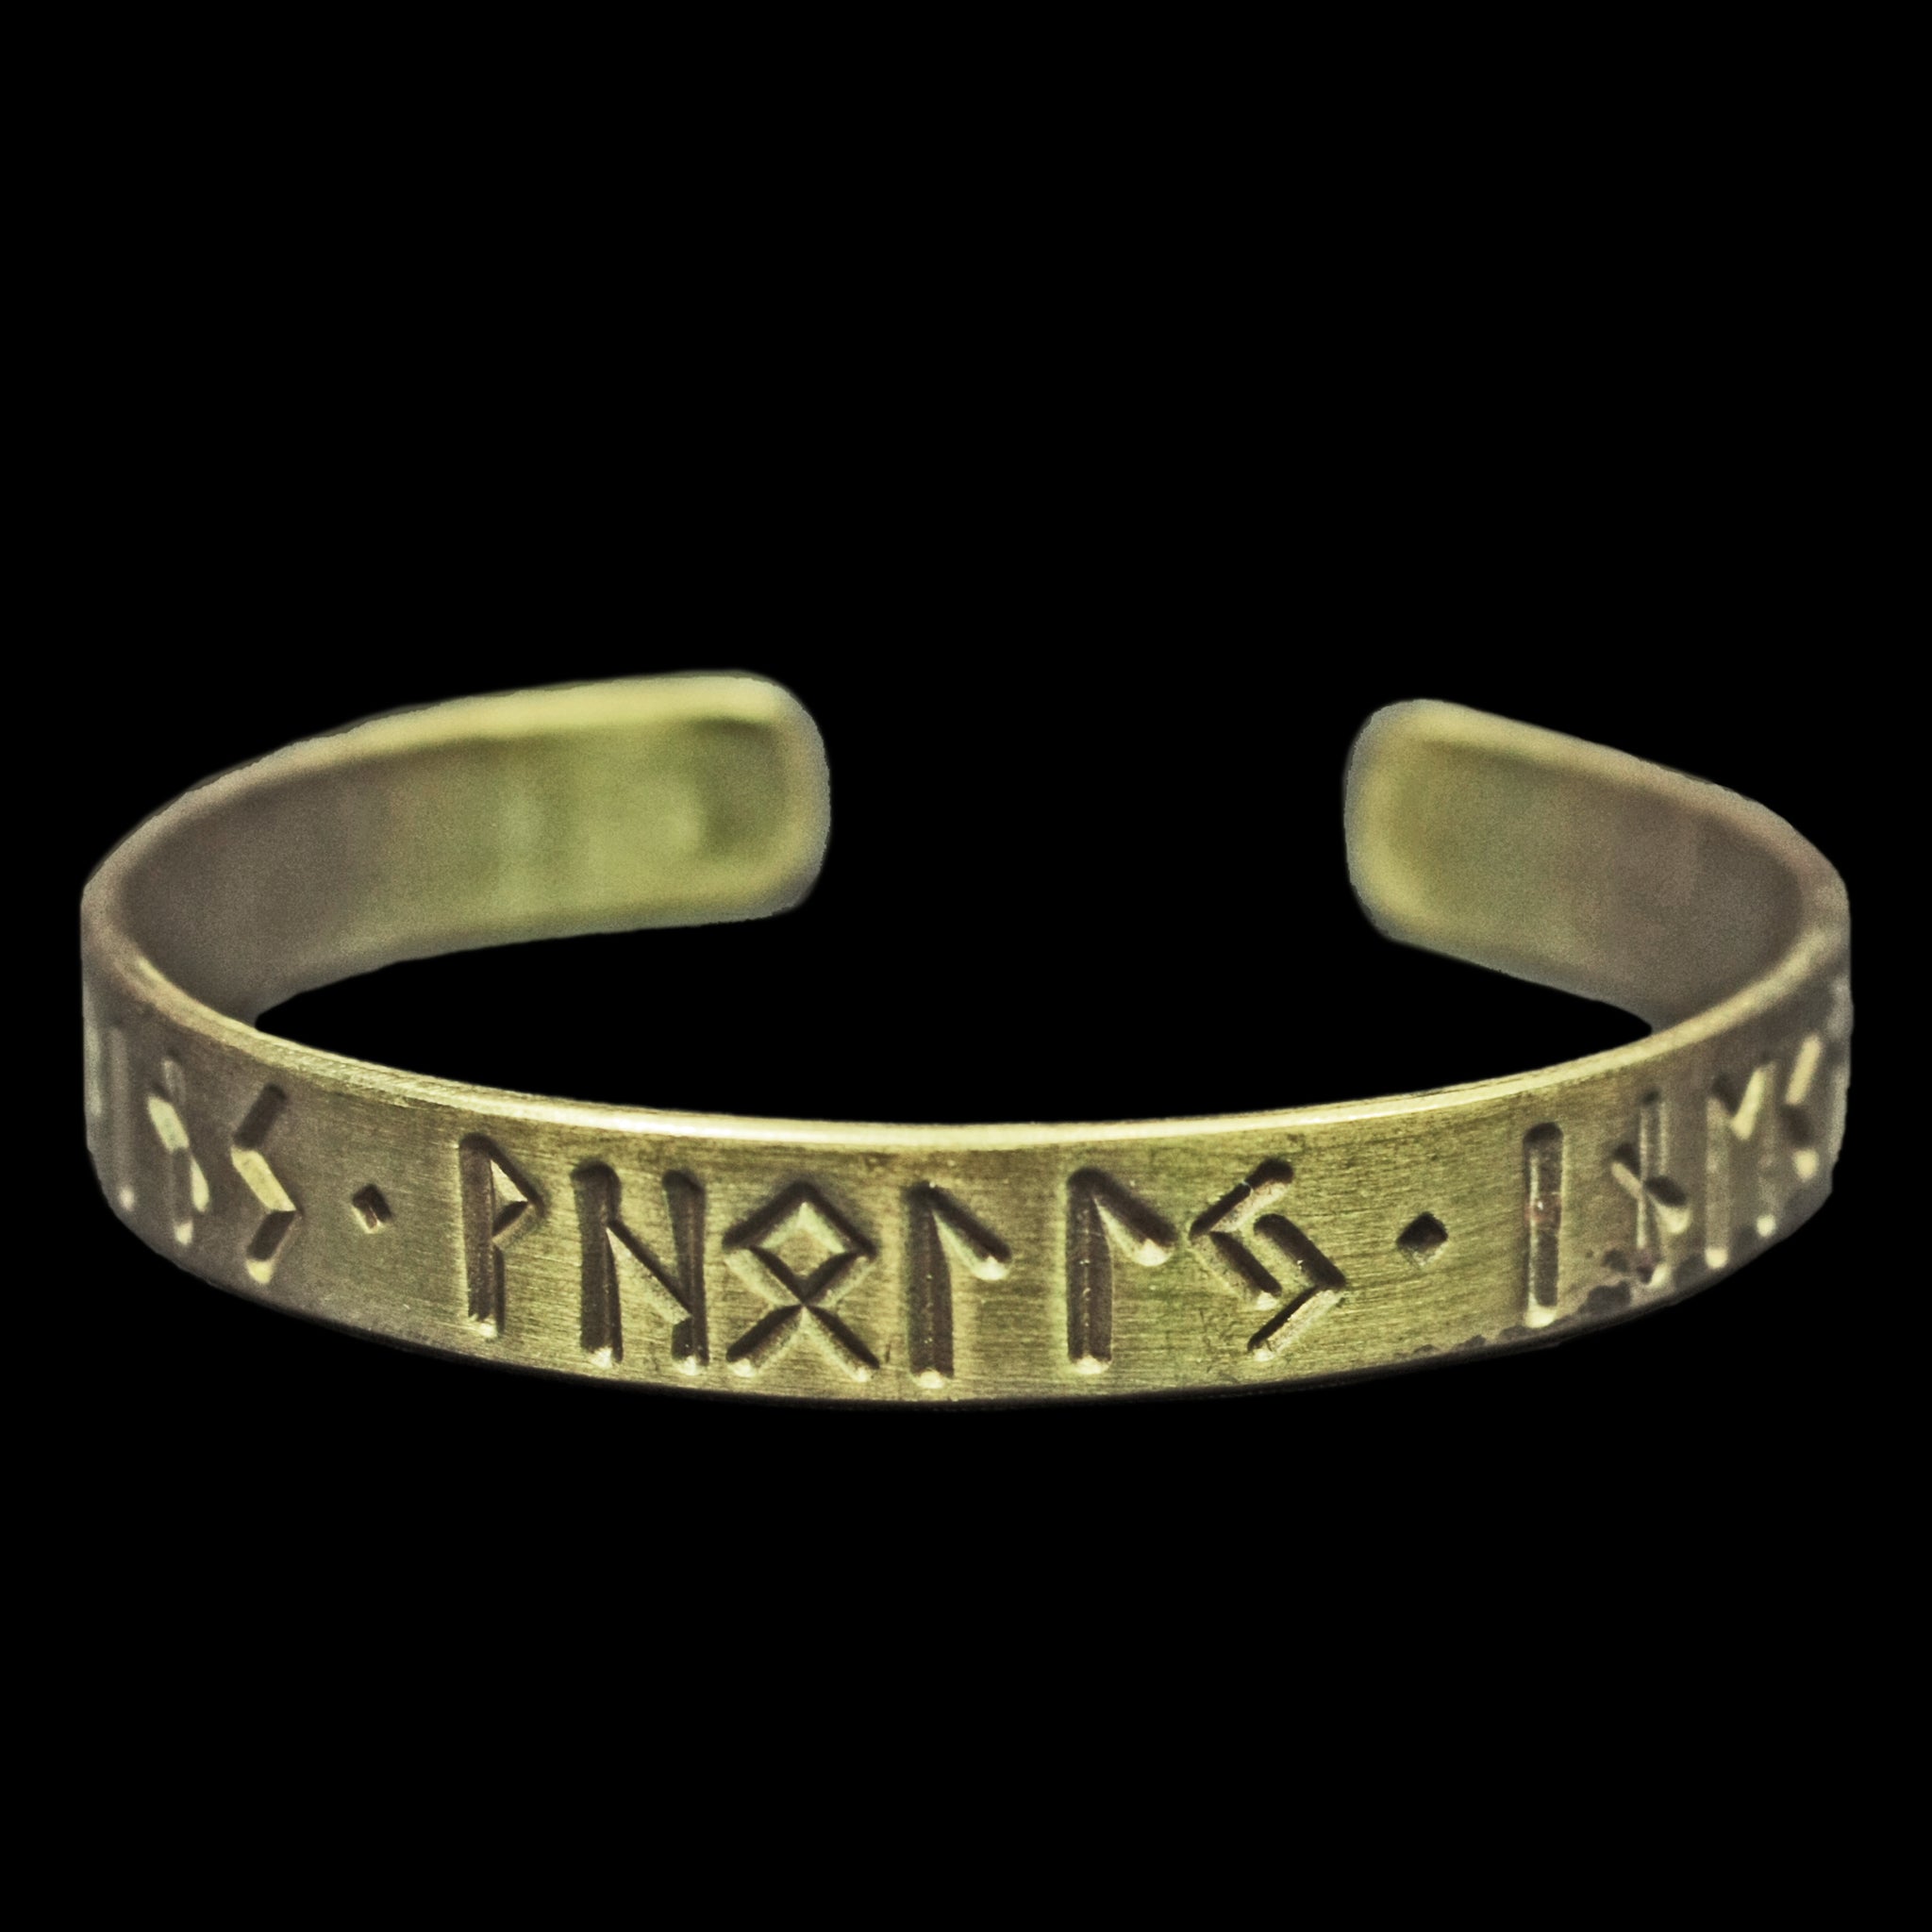 Runic Viking / Saxon Bracelet in Solid Bronze with Runic Inscription